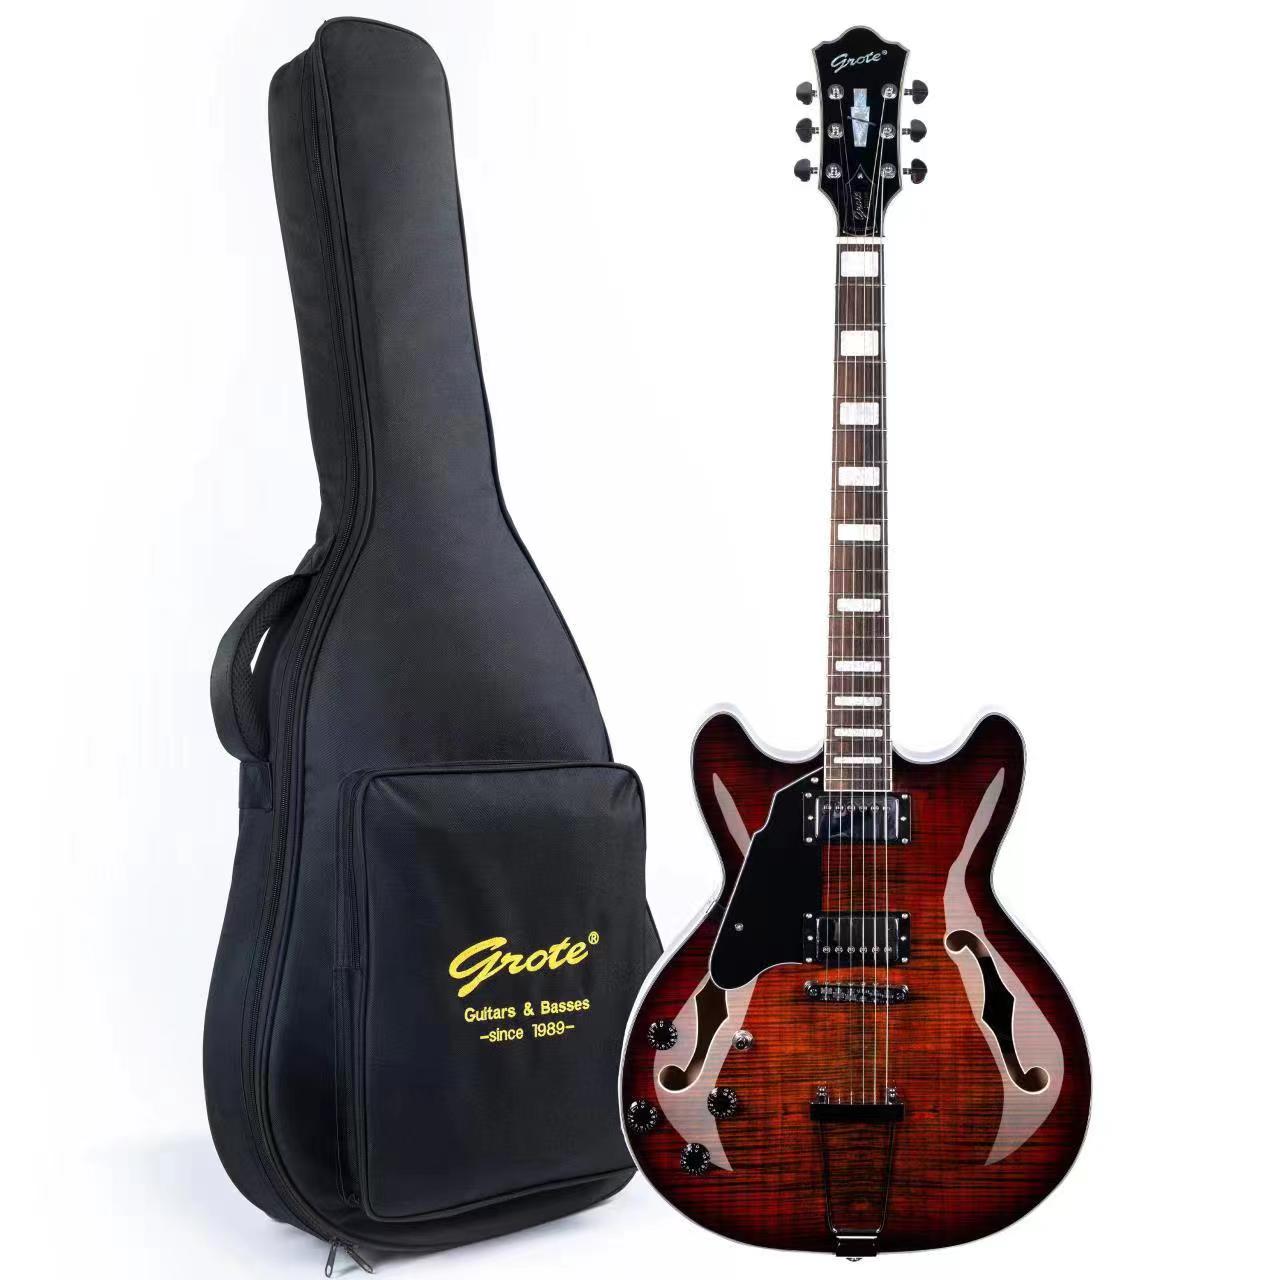 Grote Jazz Left-Handed Electric Guitar Semi-Hollow Body With